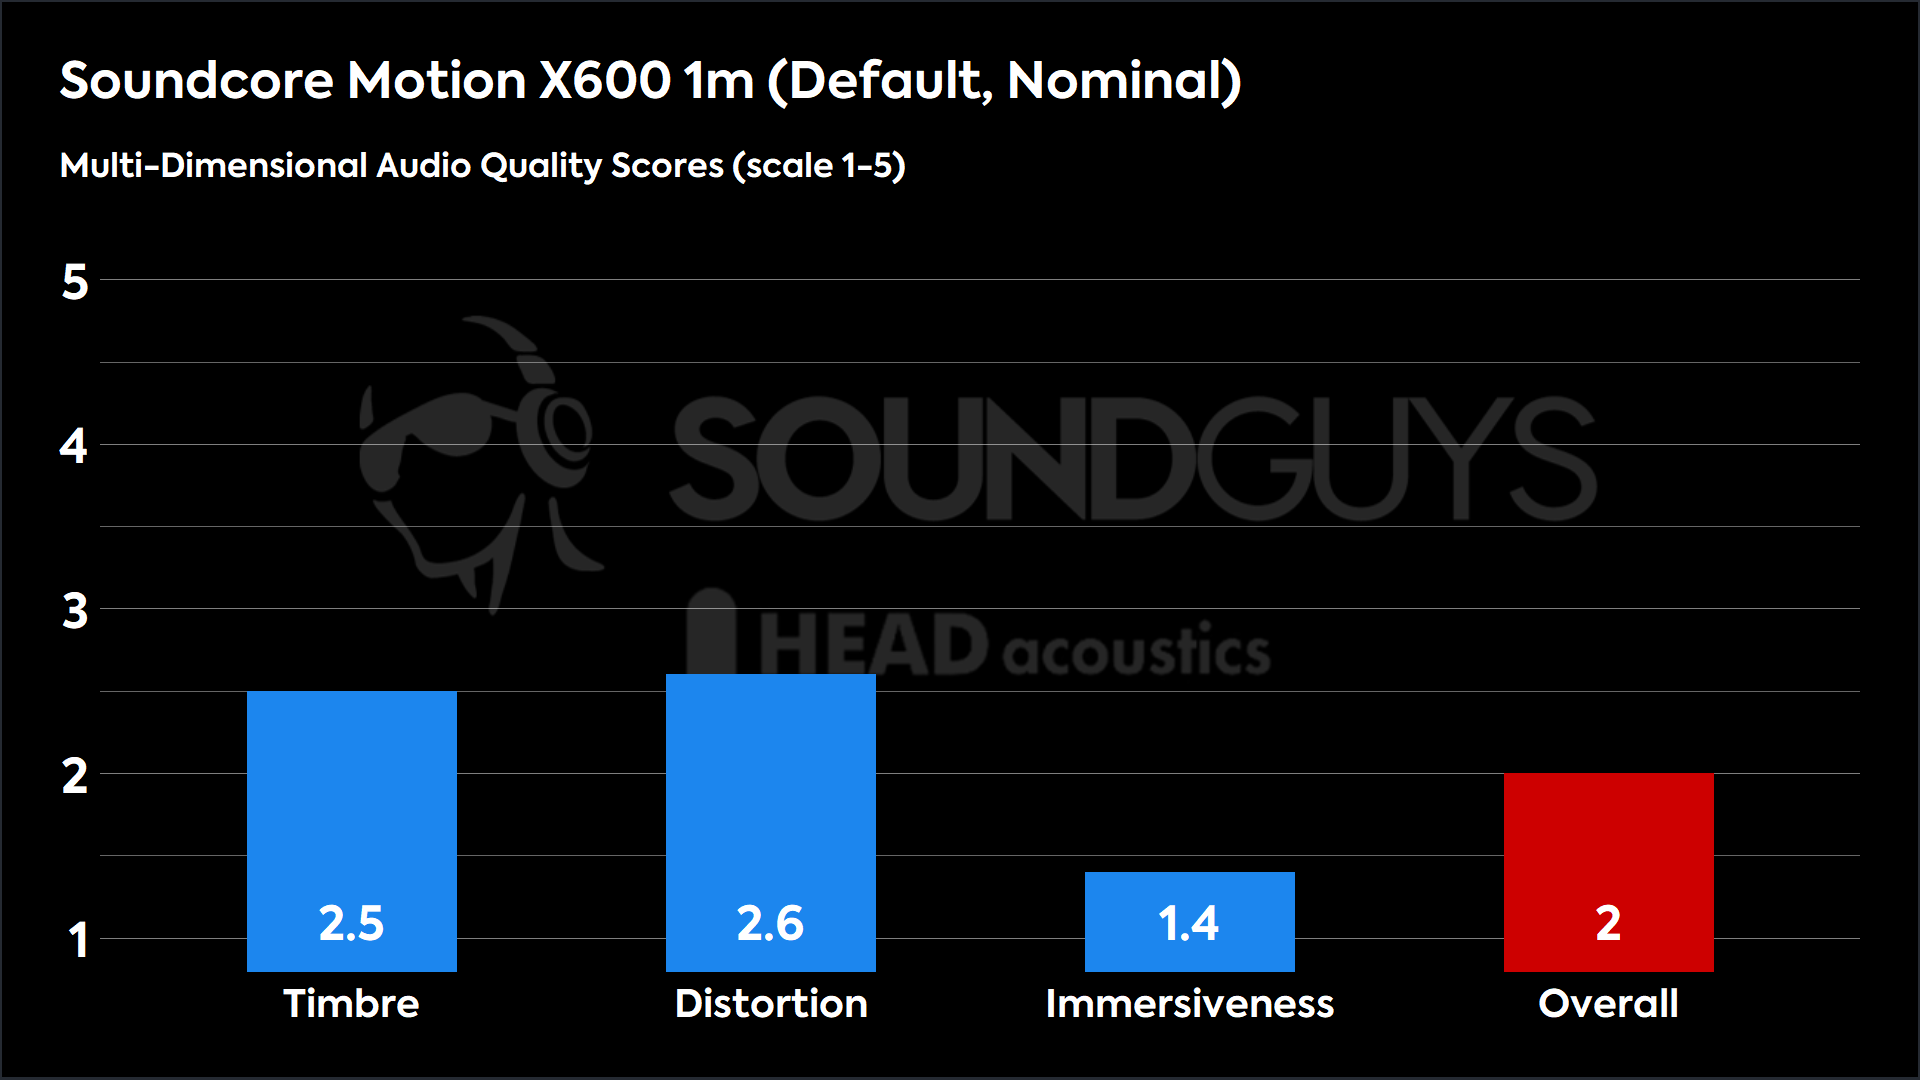 A chart showing Anker Soundcore Motion X600 MDAQS results in default mode. 